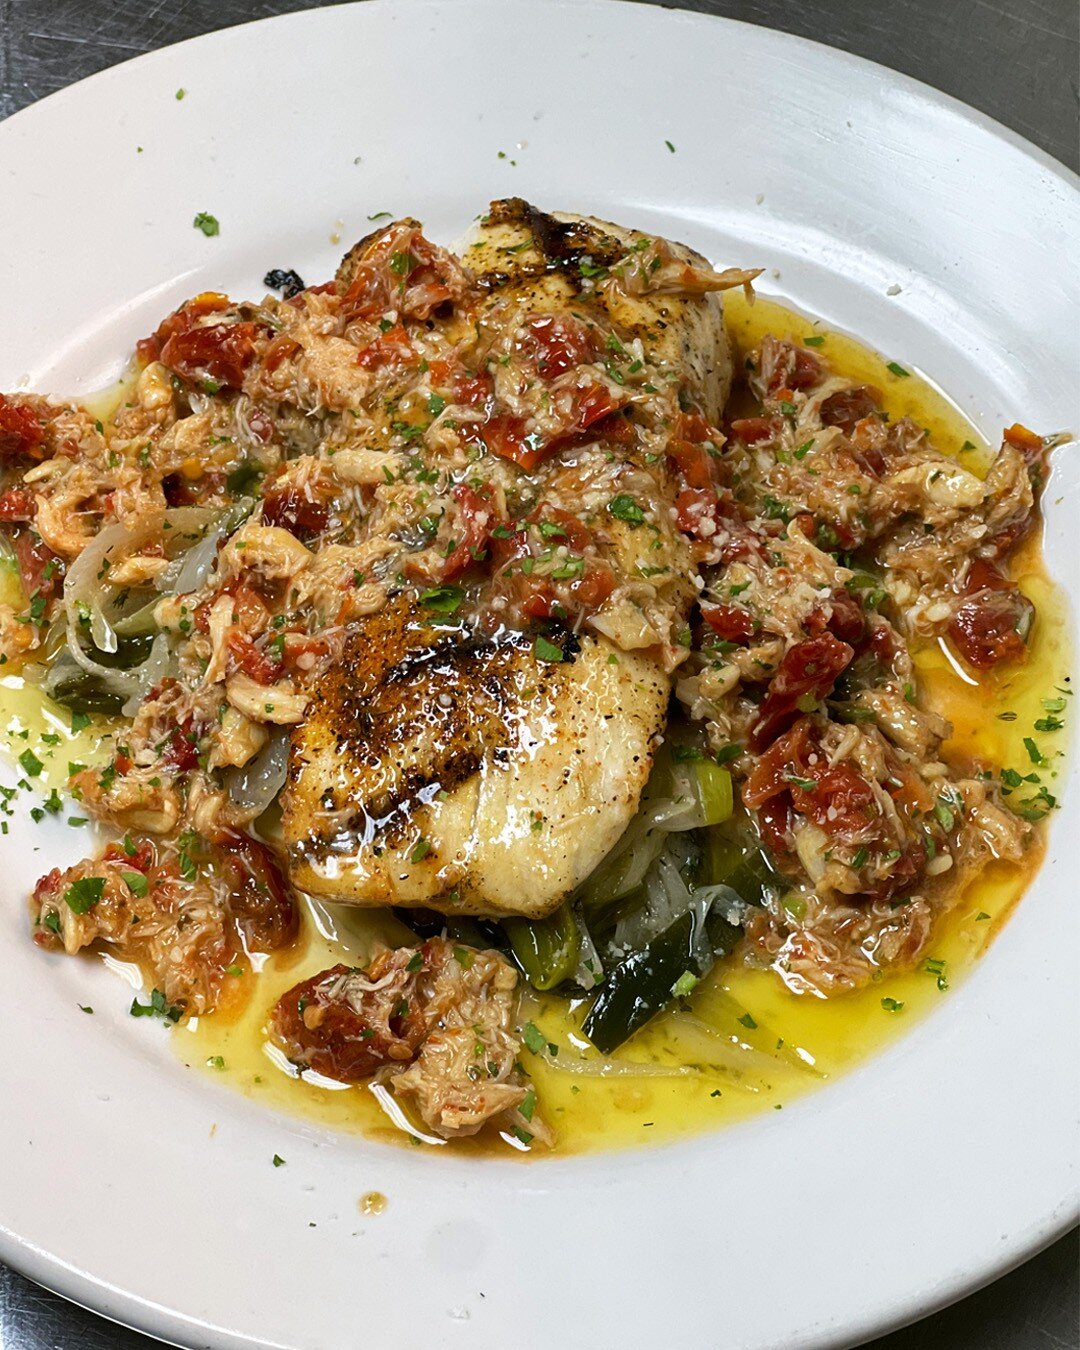 Bring the whole family and join us this weekend for a mouthwatering dinner special! 🍽

➡ Mahi Mahi with Crab 
Lightly blackened Mahi Mahi grilled and served over Buttered Leeks and Shallots. Topped in a White Wine Butter Sauce with Crab meat and sun